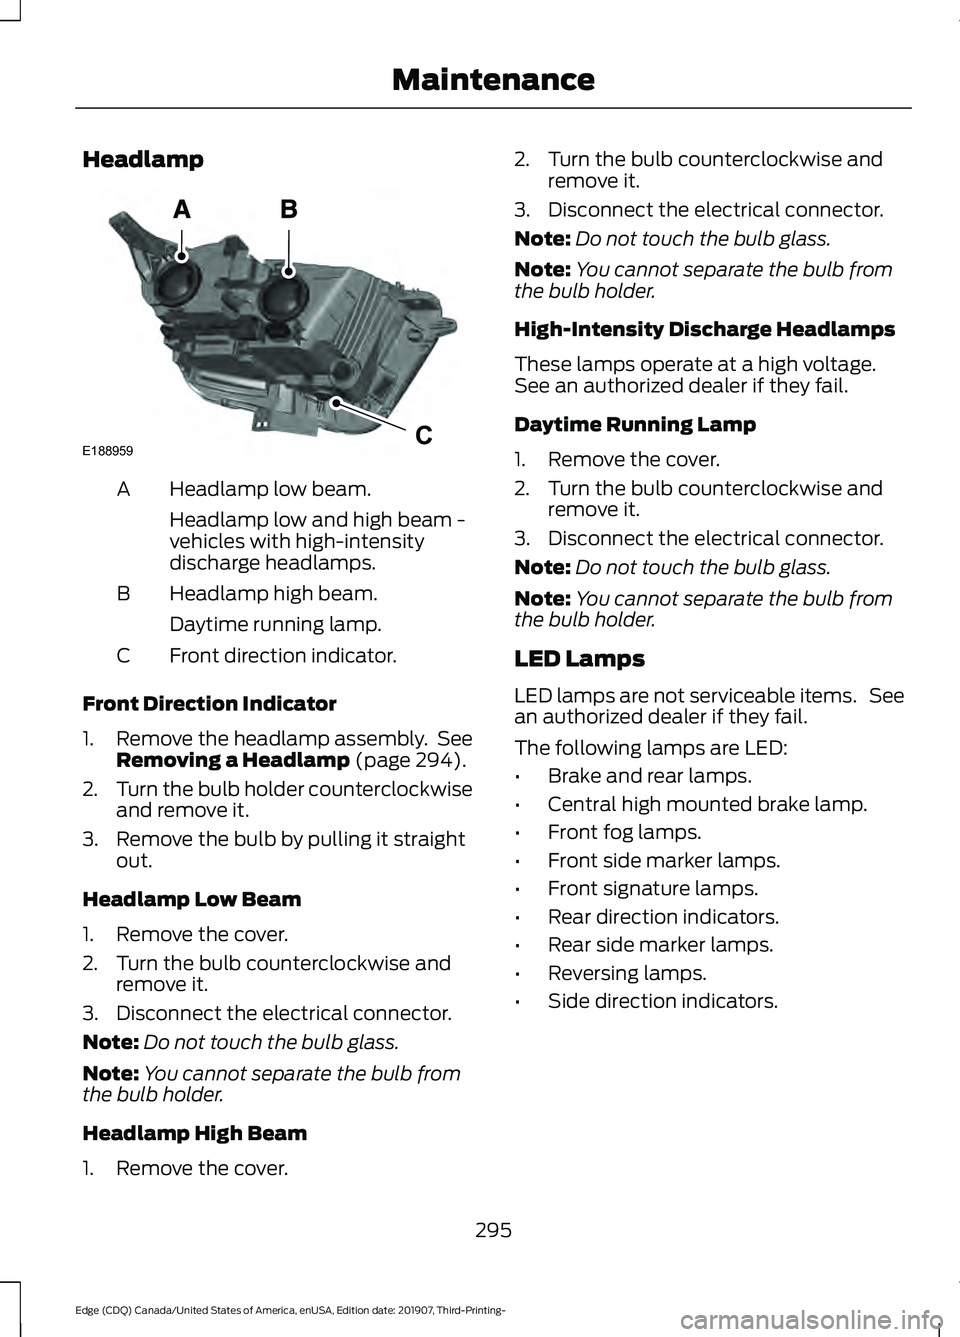 FORD EDGE 2020  Owners Manual Headlamp
Headlamp low beam.
A
Headlamp low and high beam -
vehicles with high-intensity
discharge headlamps.
Headlamp high beam.
B
Daytime running lamp.
Front direction indicator.
C
Front Direction In